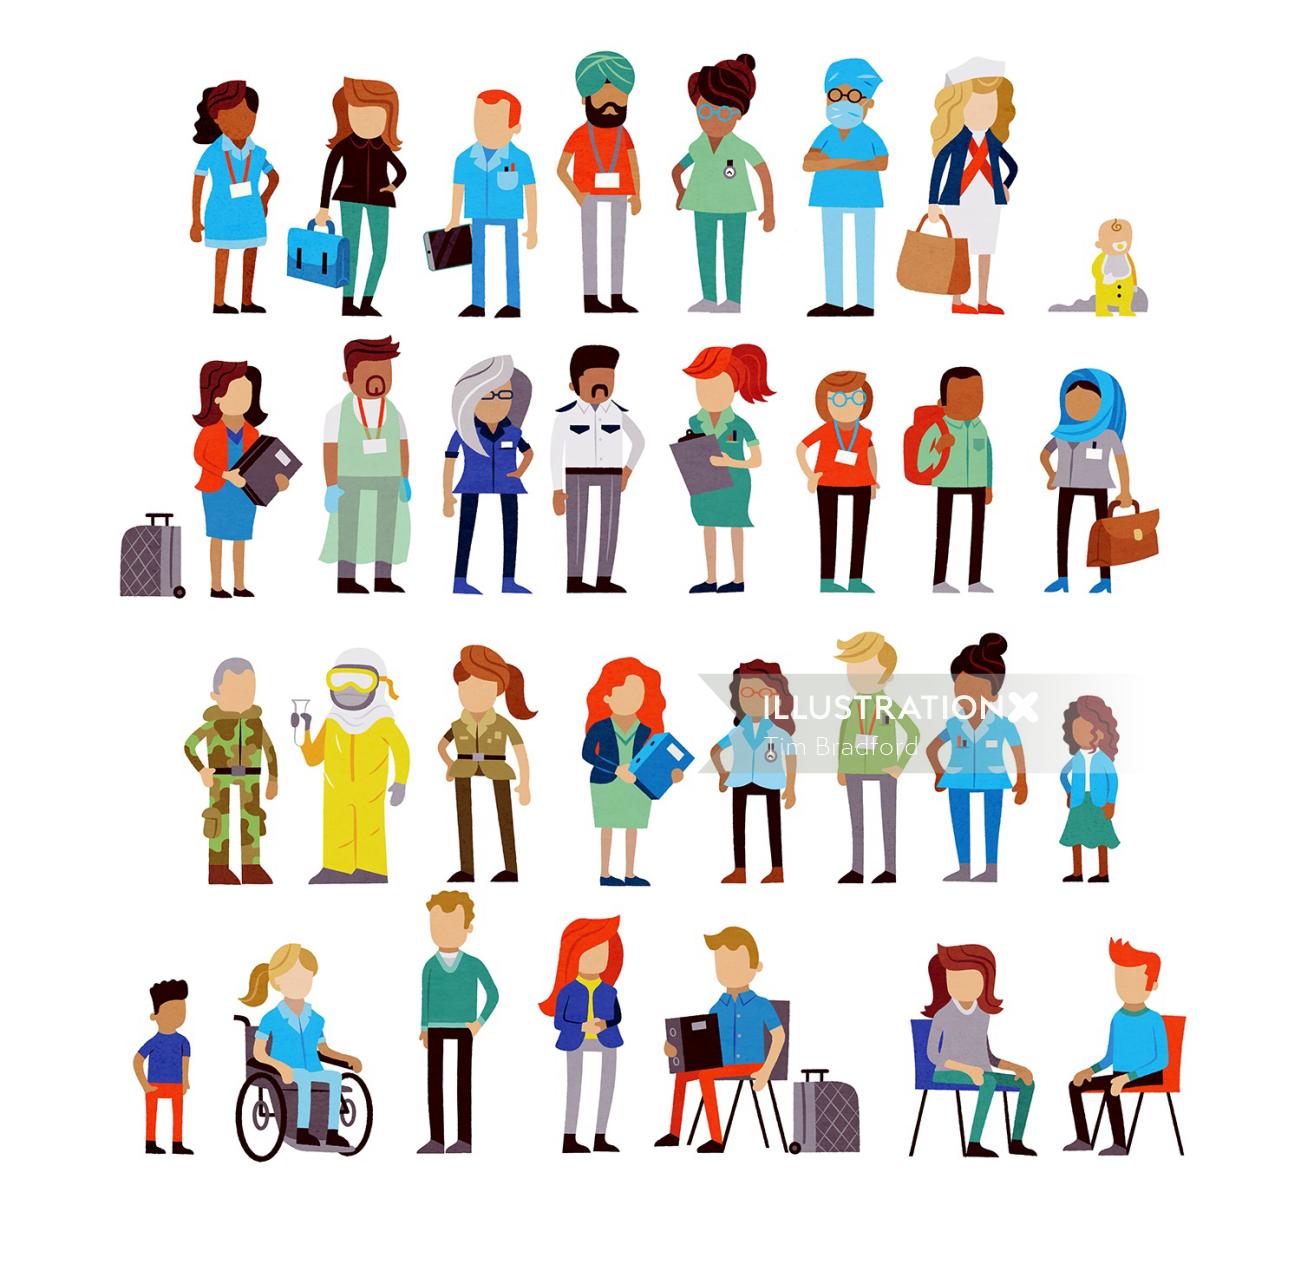 Different types of people illustration